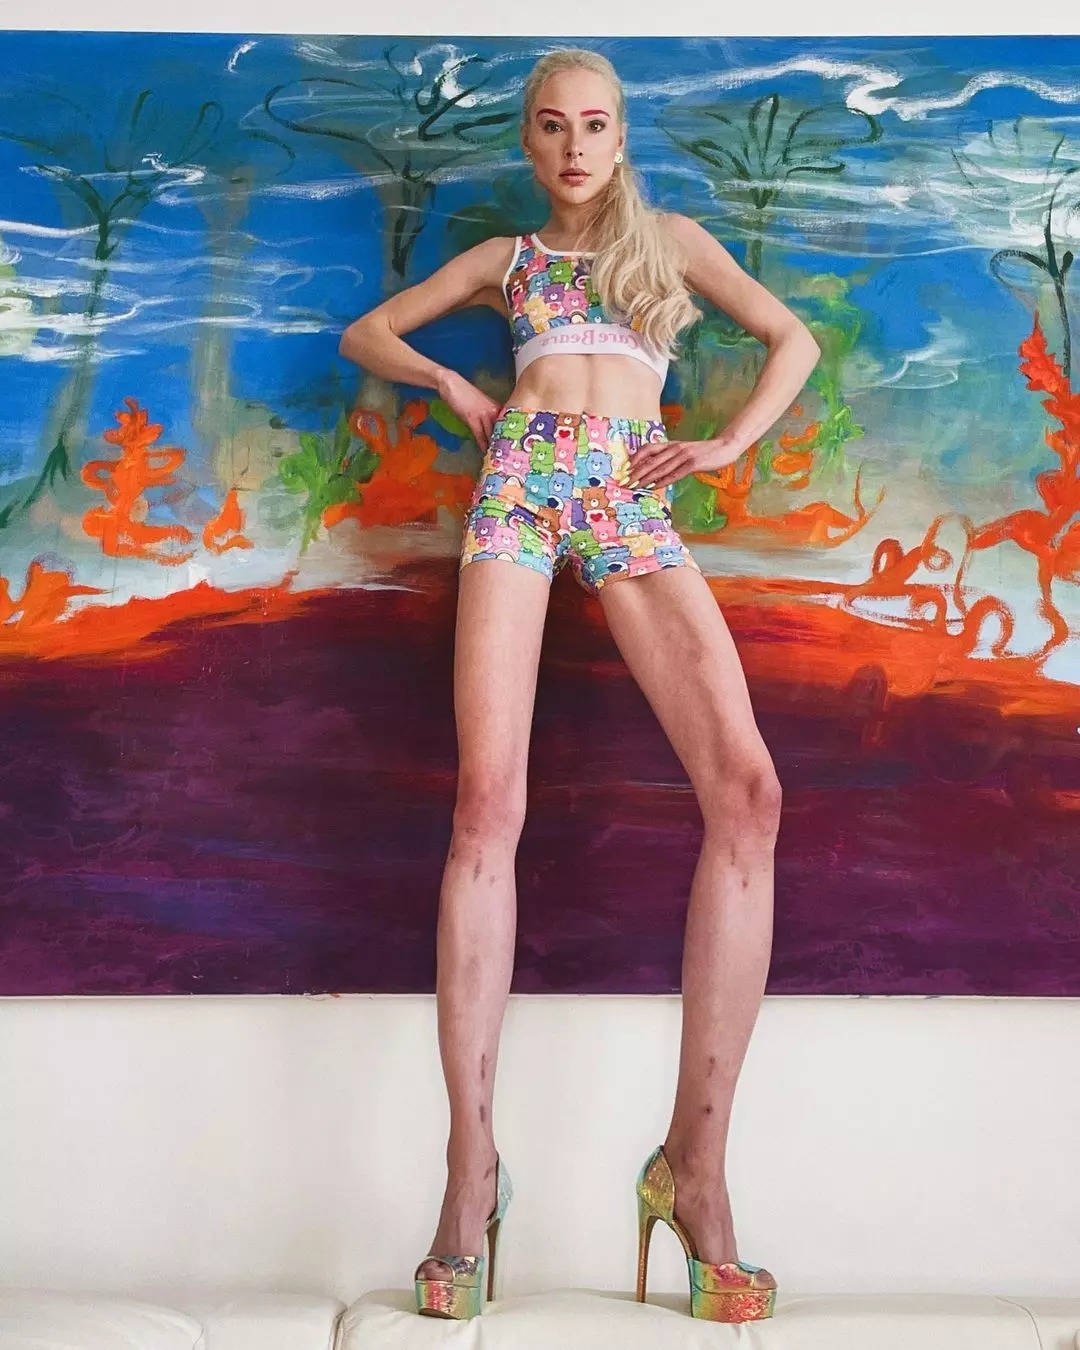 ​Theresia Fischer spent a crore to increase the length of her legs​